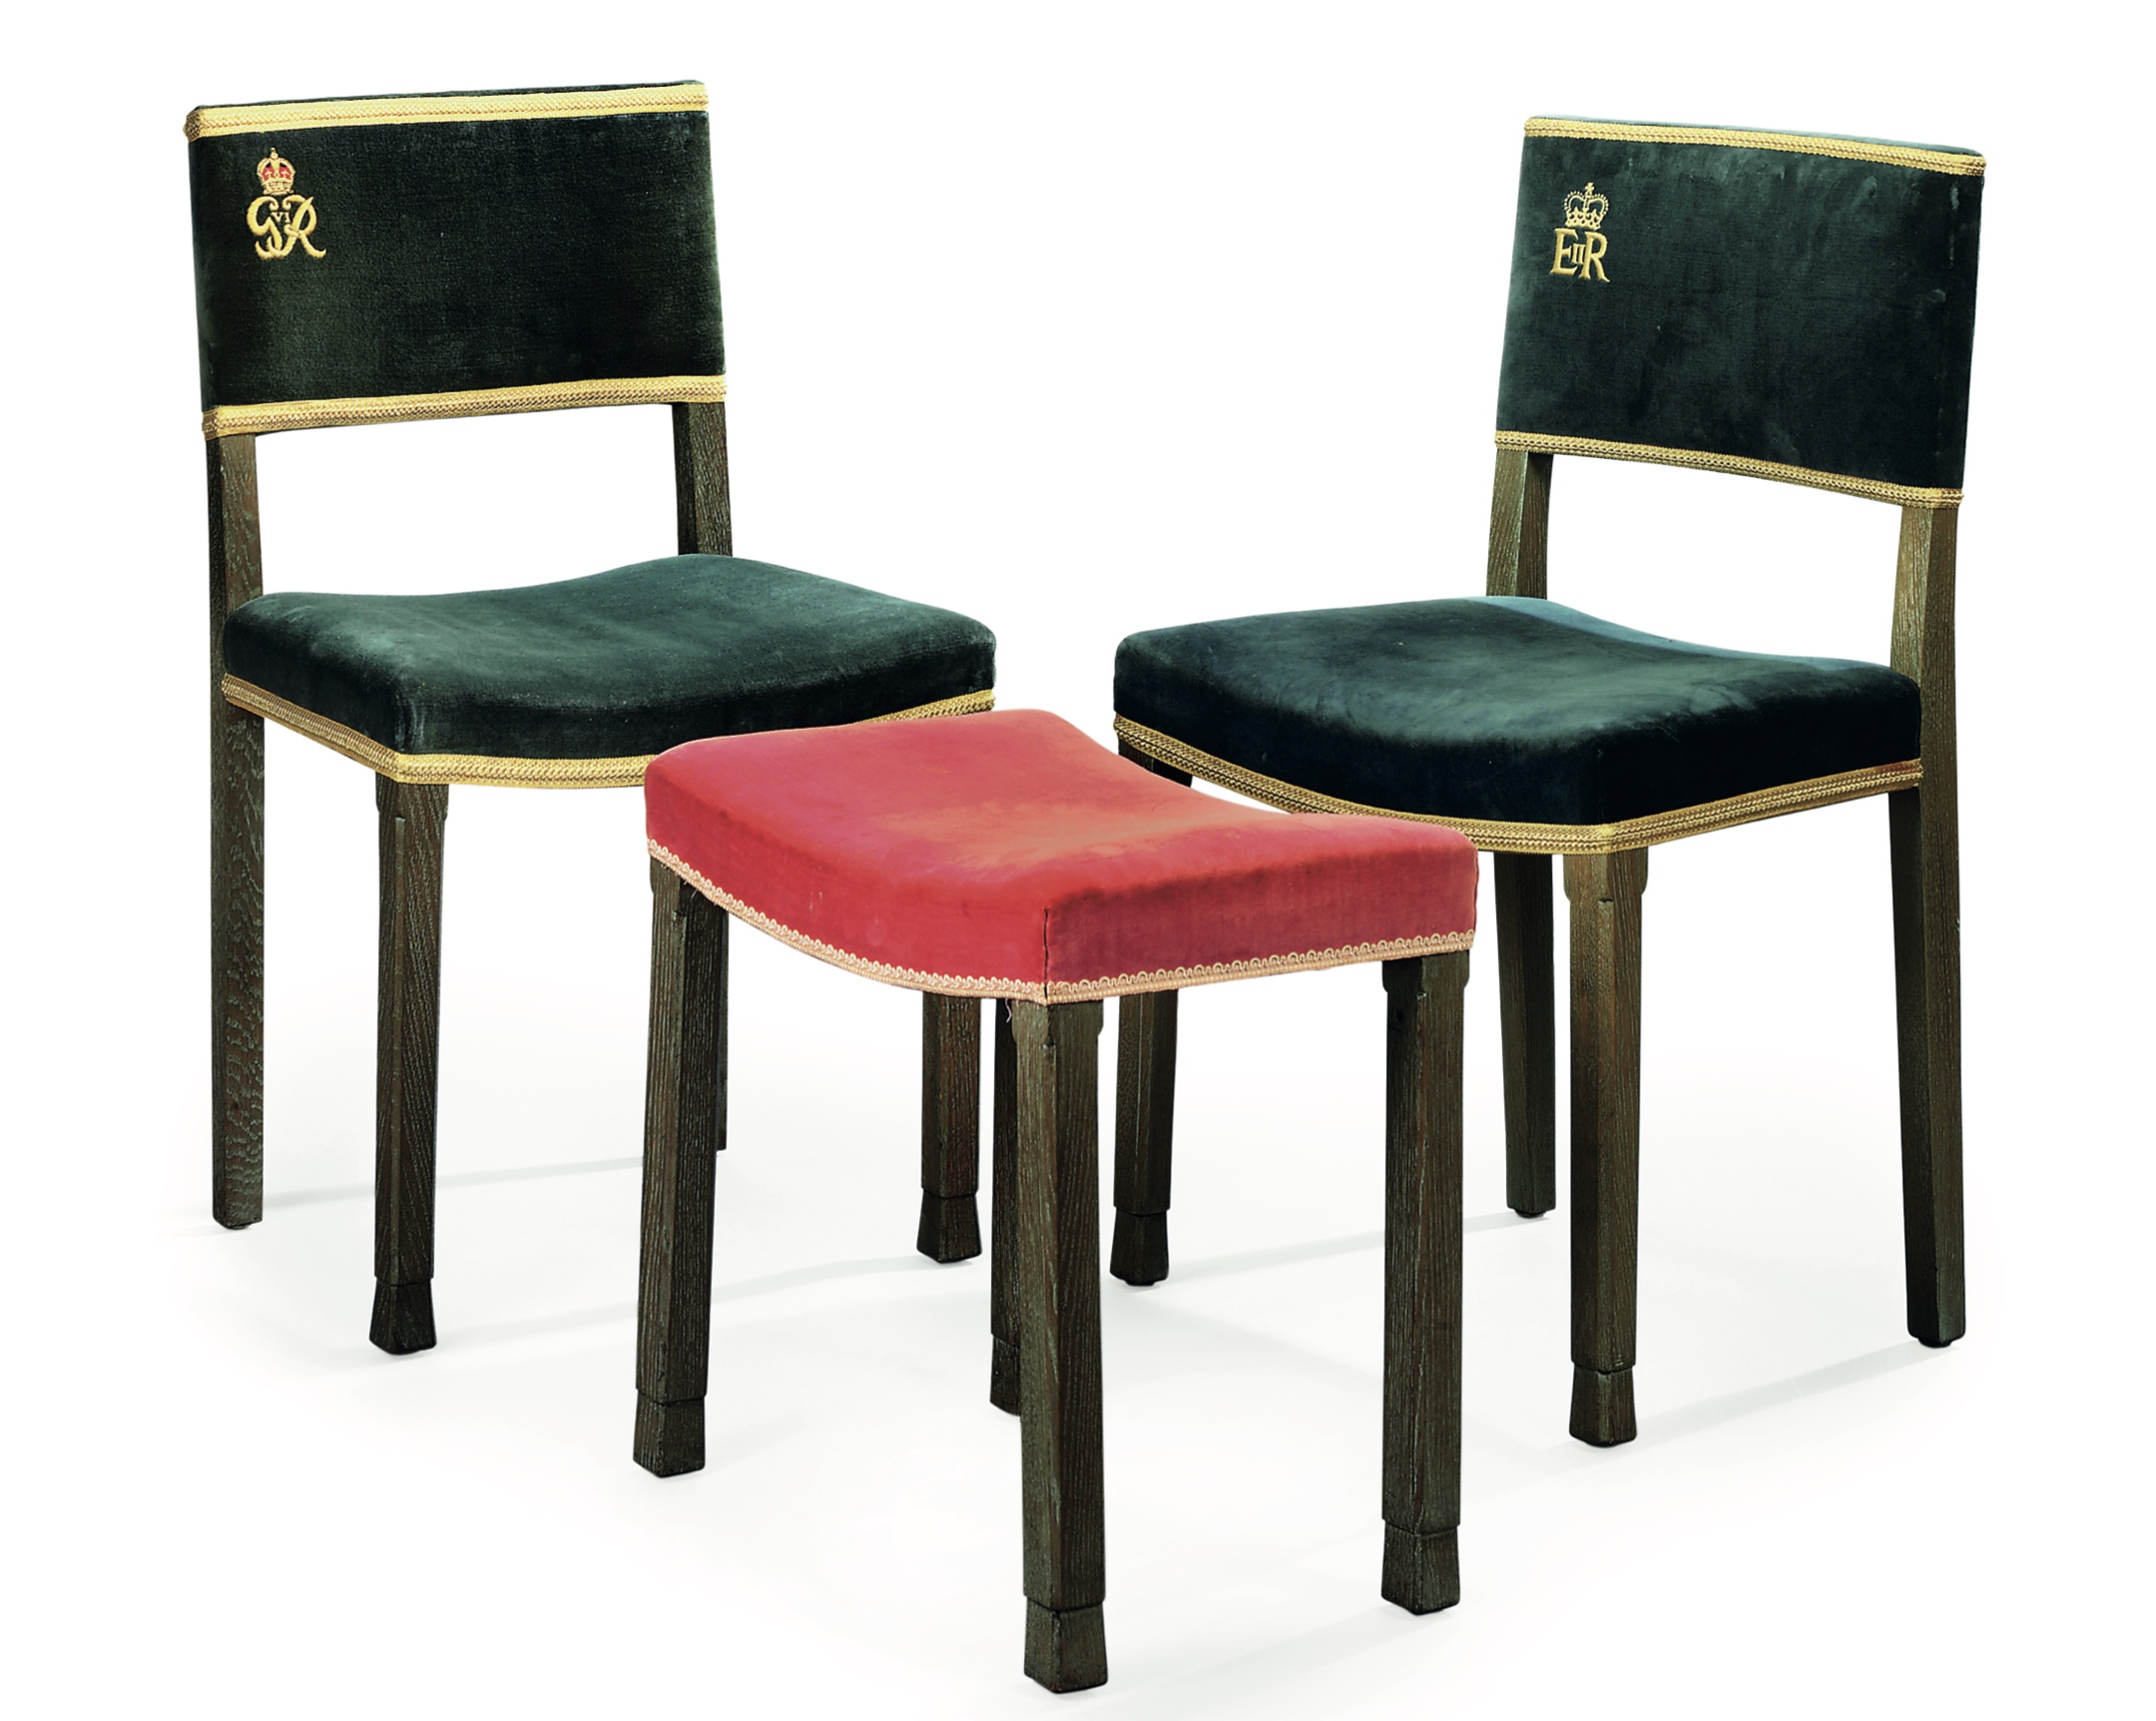 A collection of chairs made for a British coronation